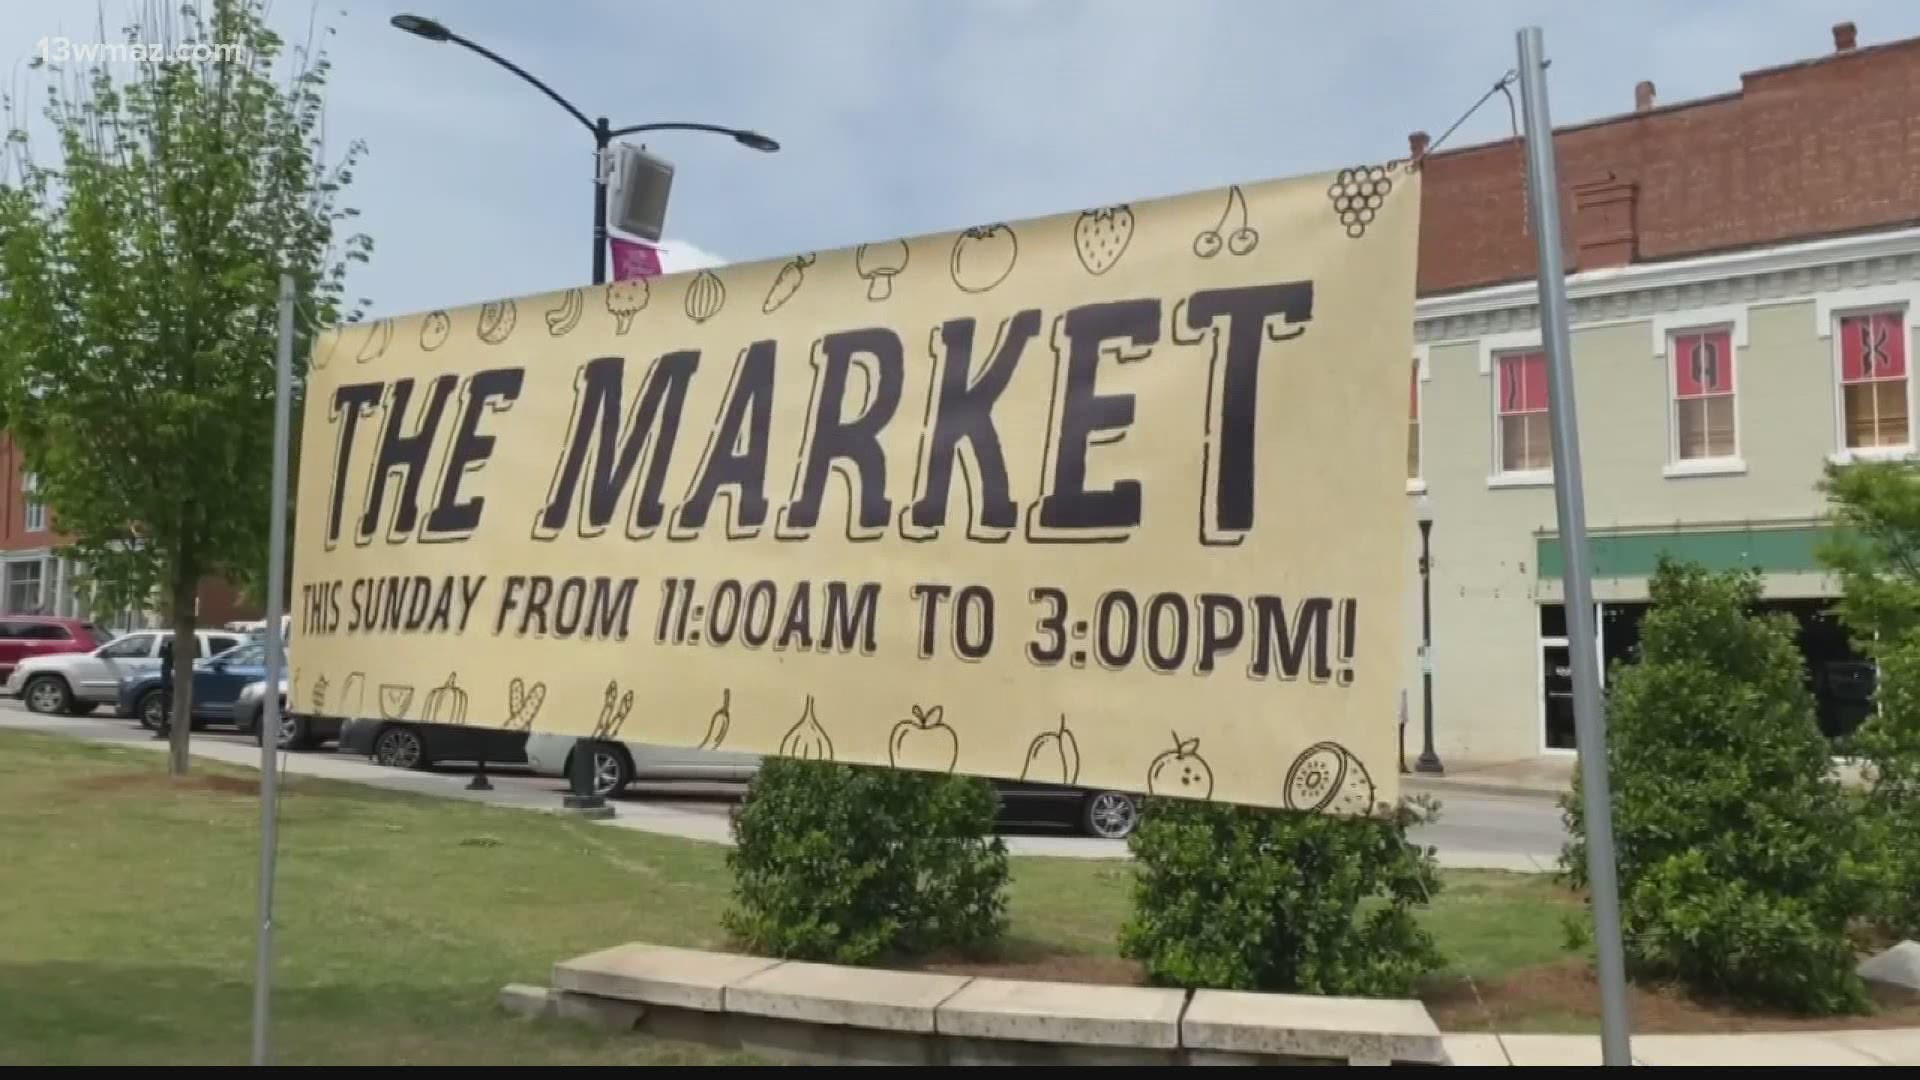 The Market will feature local products, handmade crafts, and artisan goods, along with musicians.